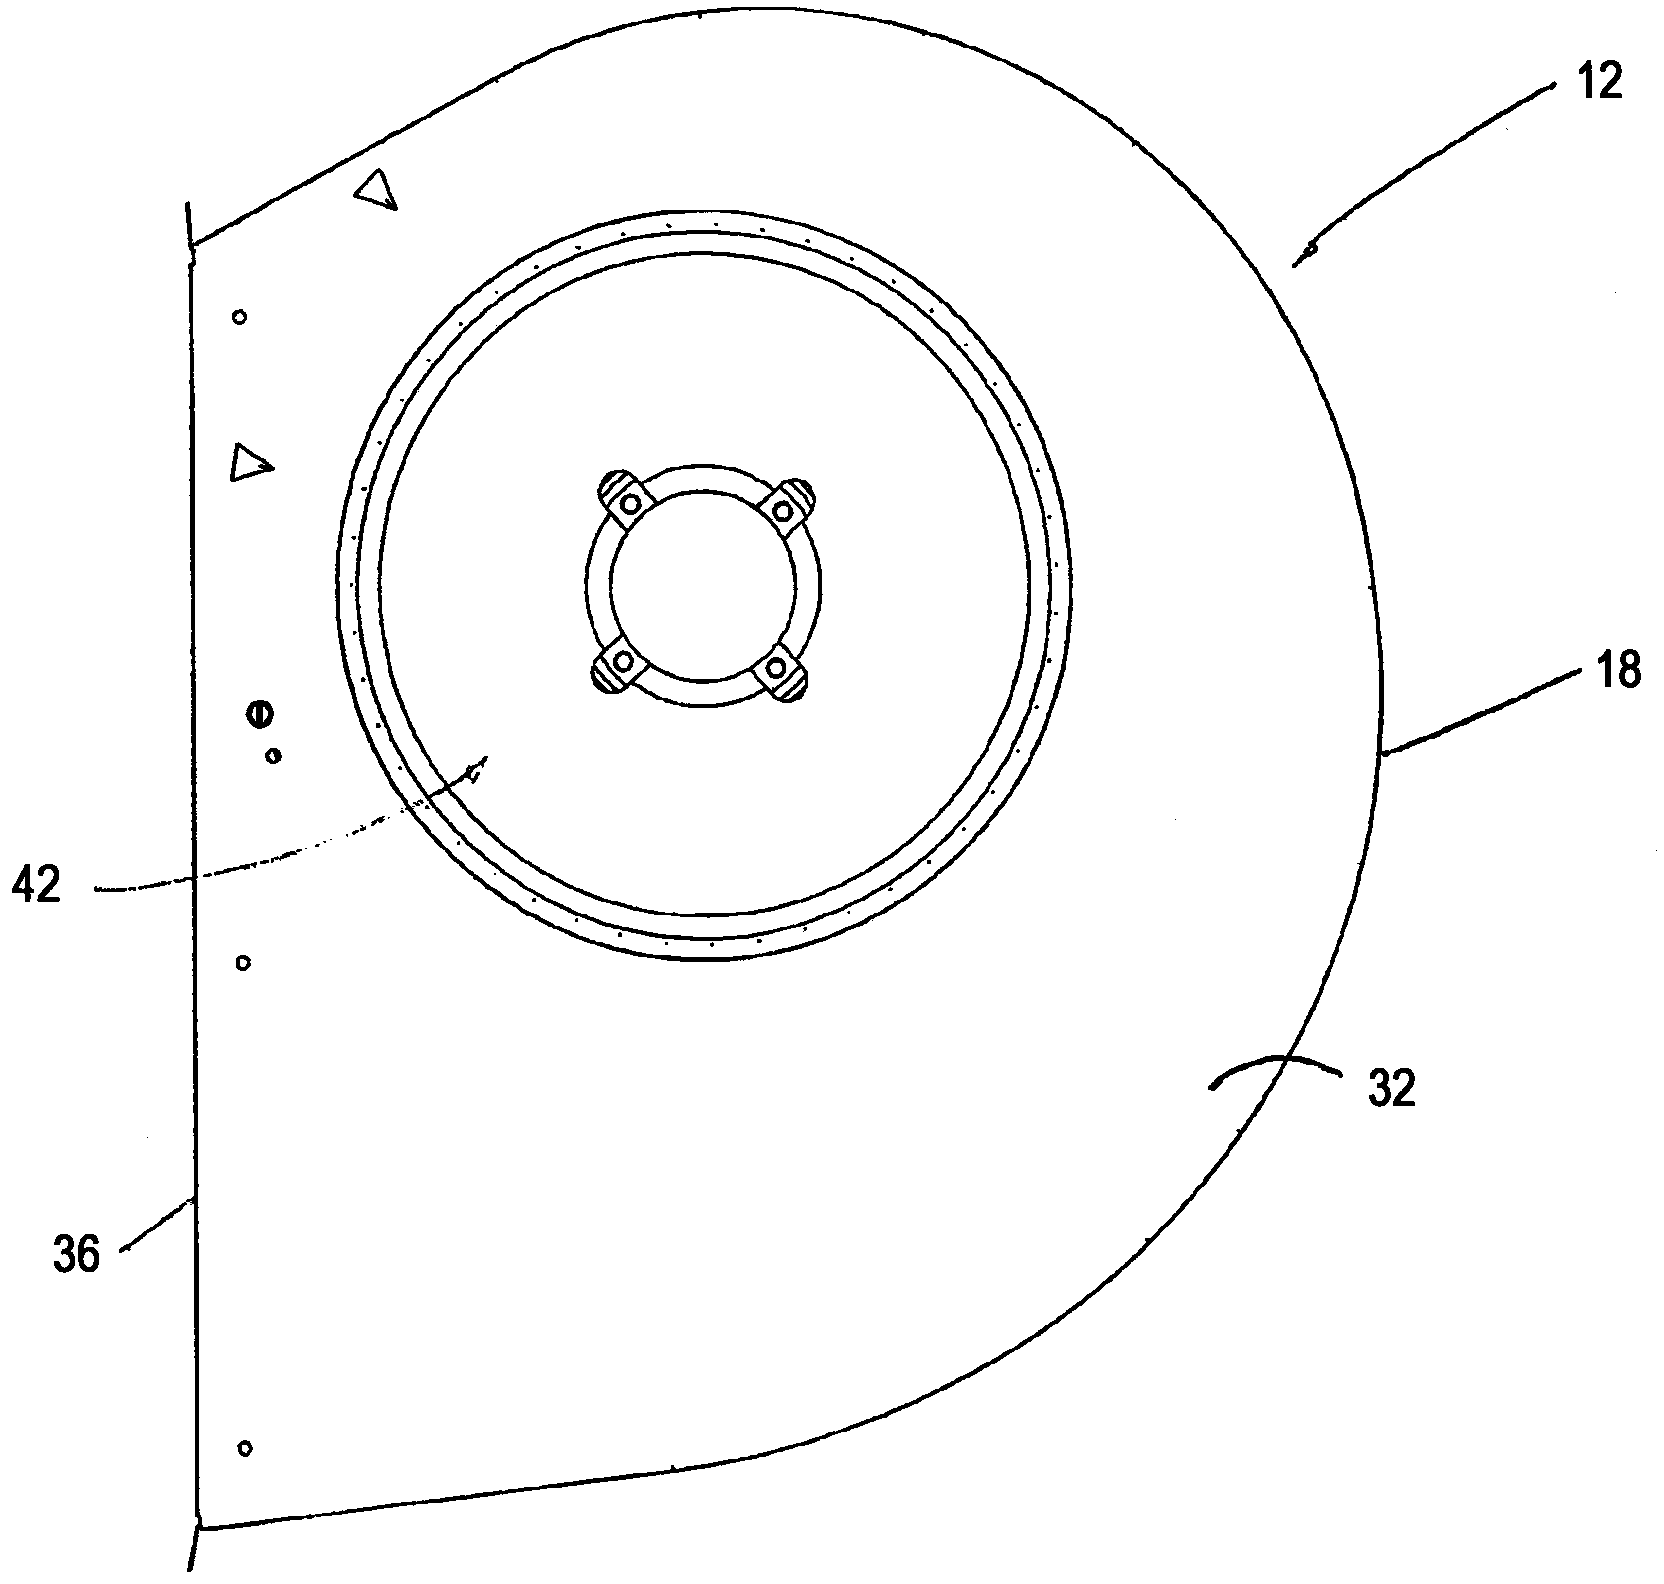 Blower assembly with motor integrated into the impeller fan and blower housing constructions